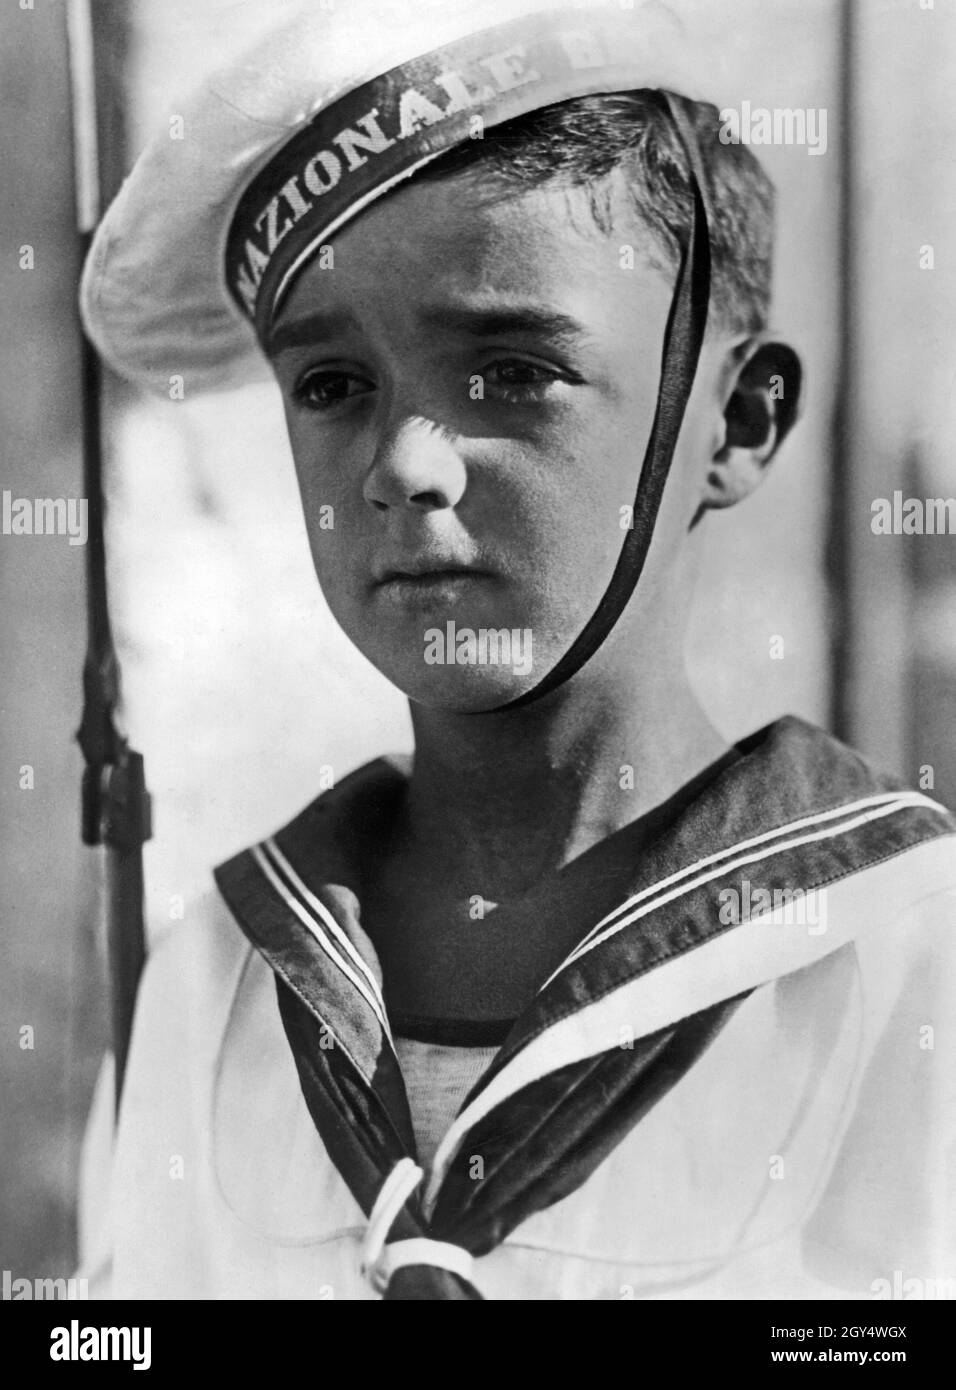 This Italian boy is a member of the Marinaretti, the naval training division within the fascist youth organization Opera Nazionale Balilla. The photograph from 1943 shows him wearing a plate cap and sailor suit. [automated translation] Stock Photo